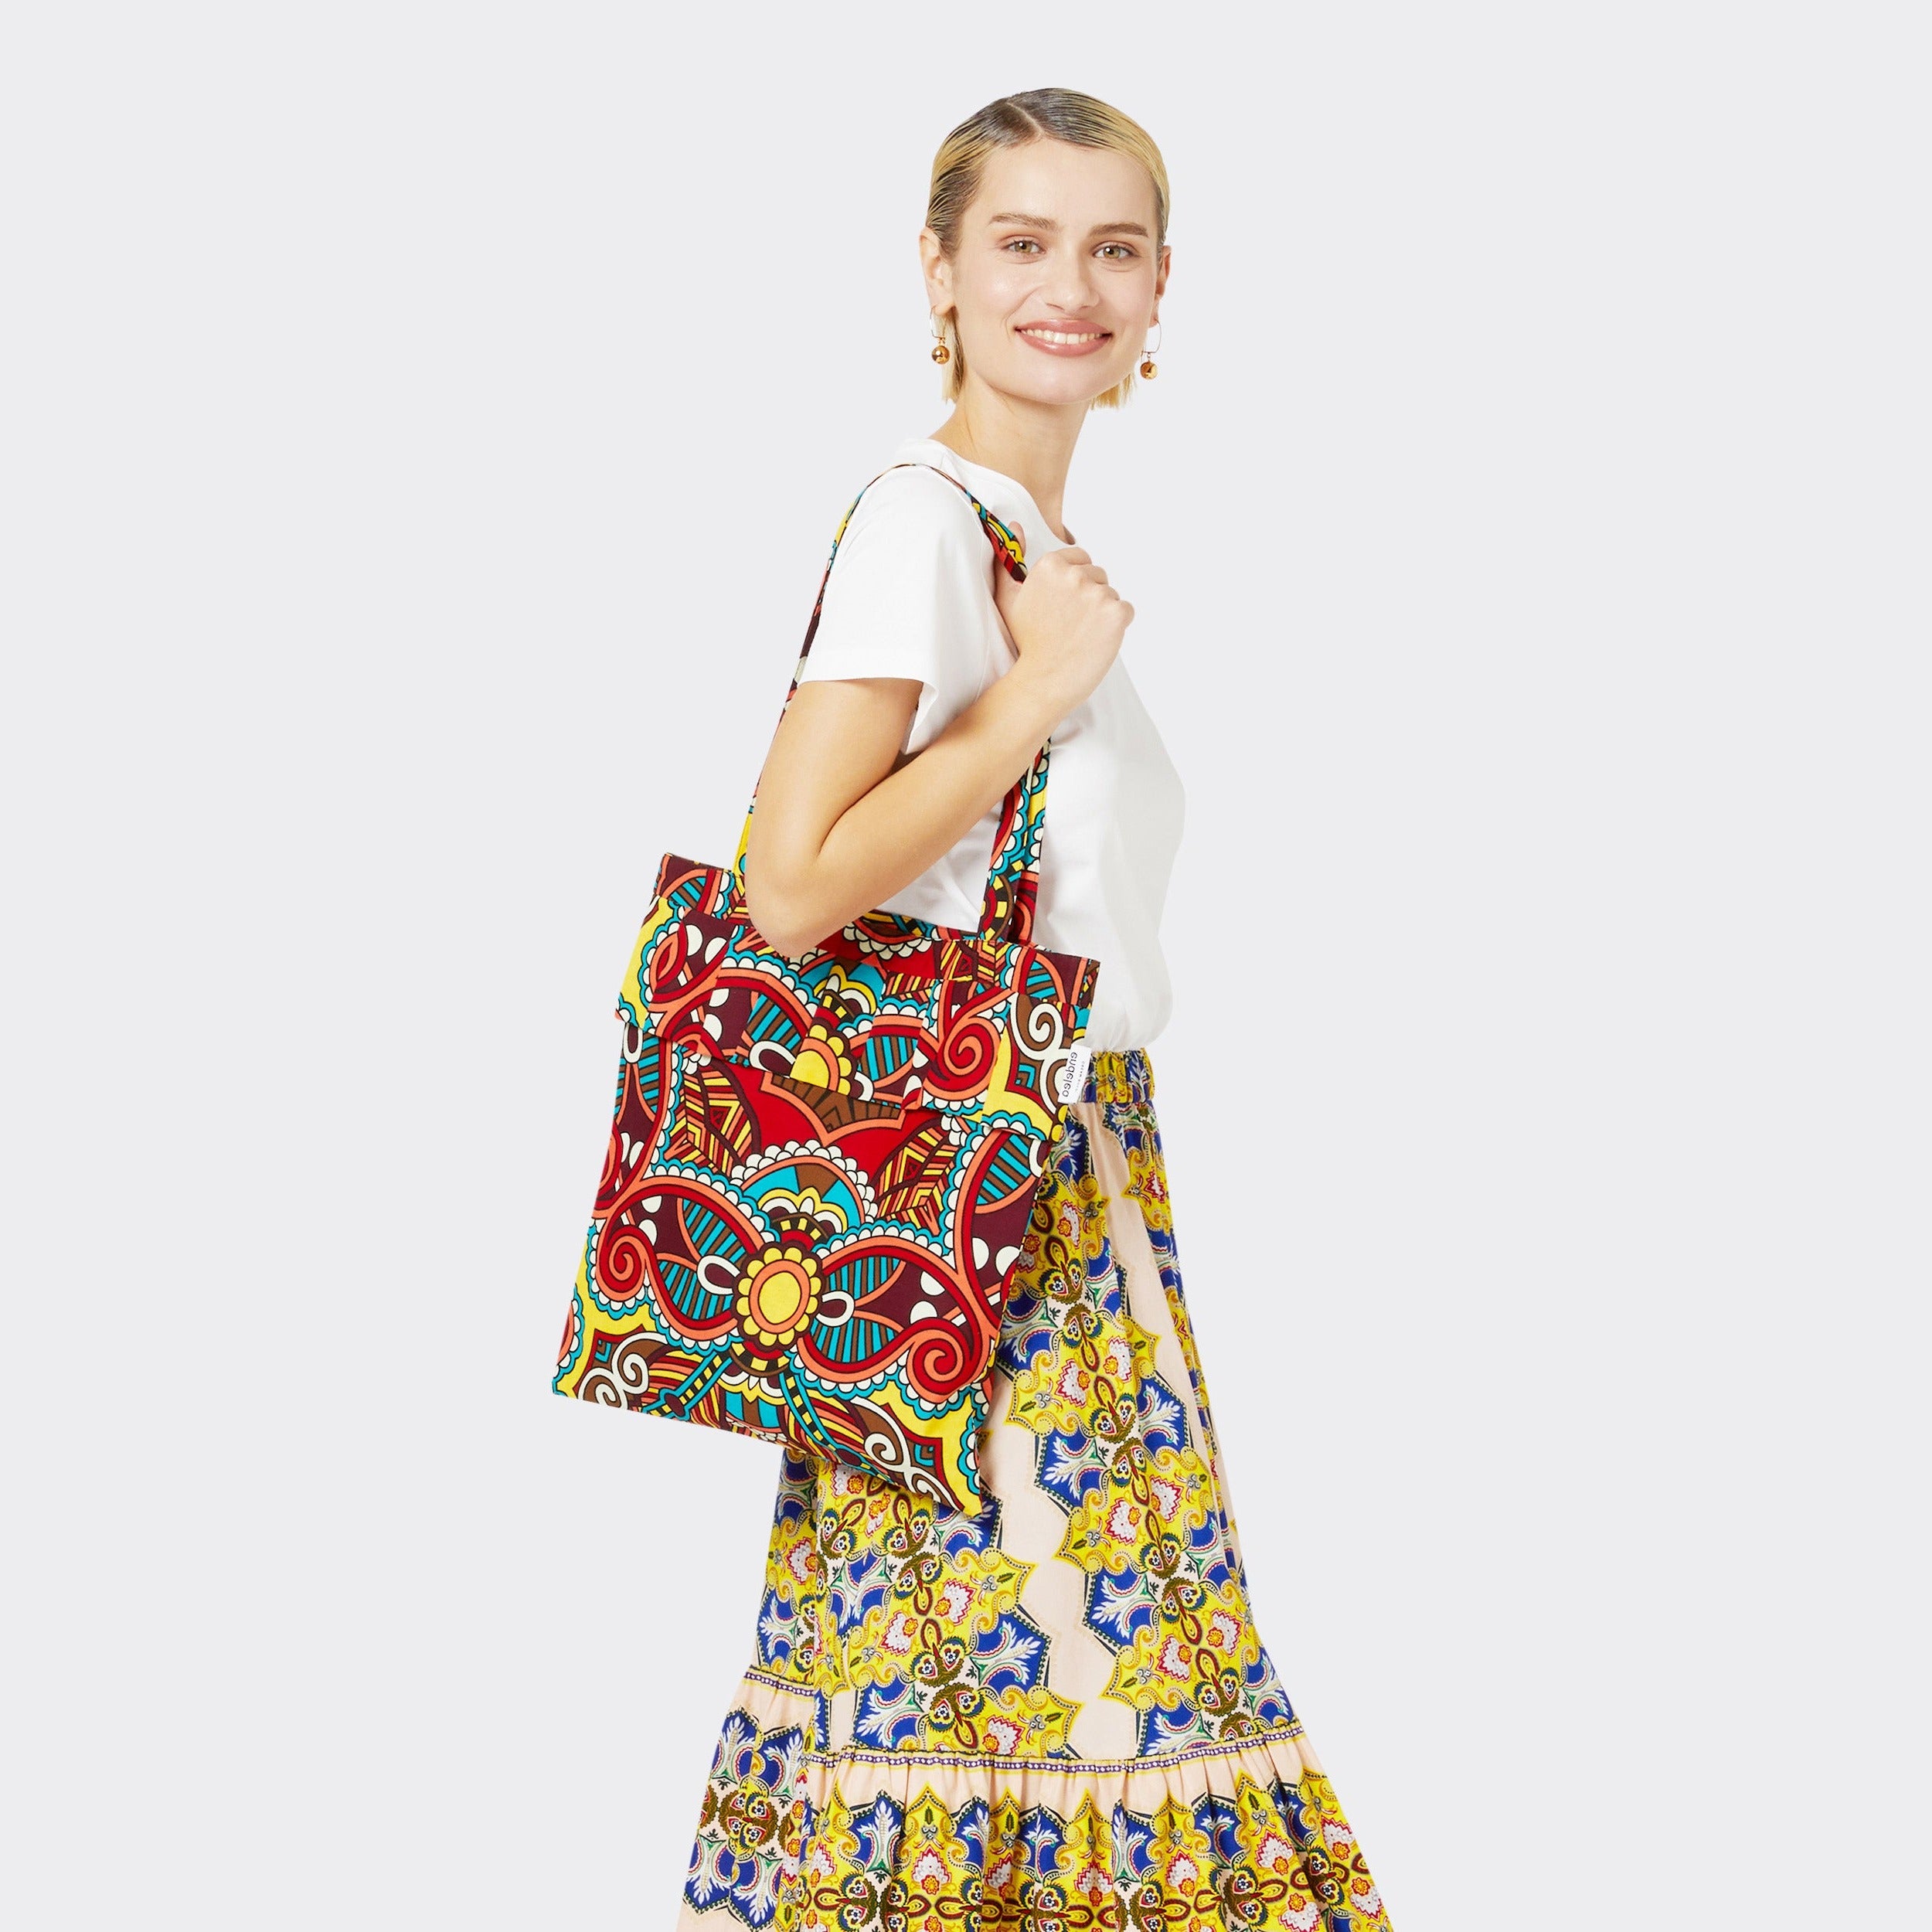 The model is holding the Tote Bag with Rouche in Wax African Dream with colors red, blue, yellow. She is wearing the Flounced Maxi Skirt in Wax Magic Mosaic with colors yellow and blue with a plain white tshirt.